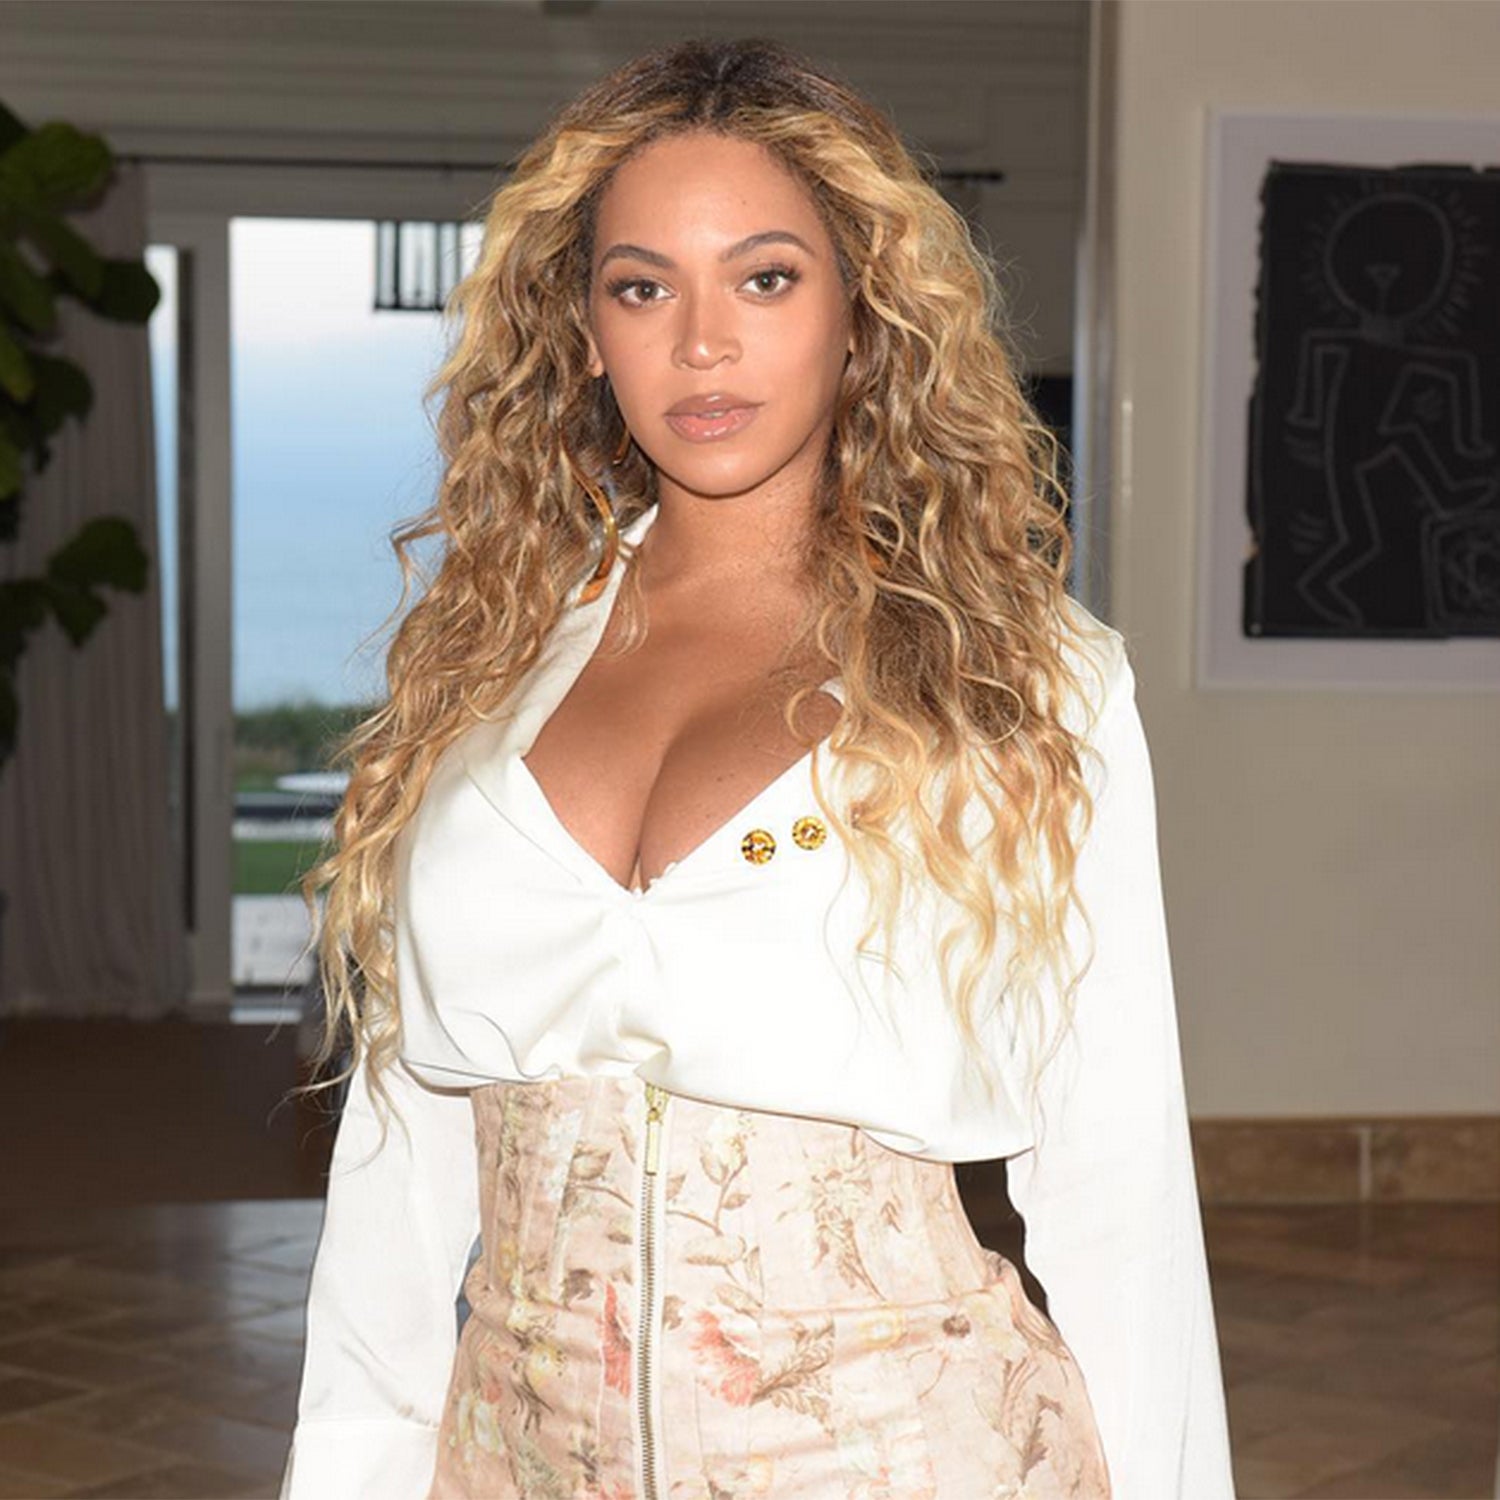 Beyoncé Hasn’t Started to Work Out Yet After Giving Birth to Twins: Source